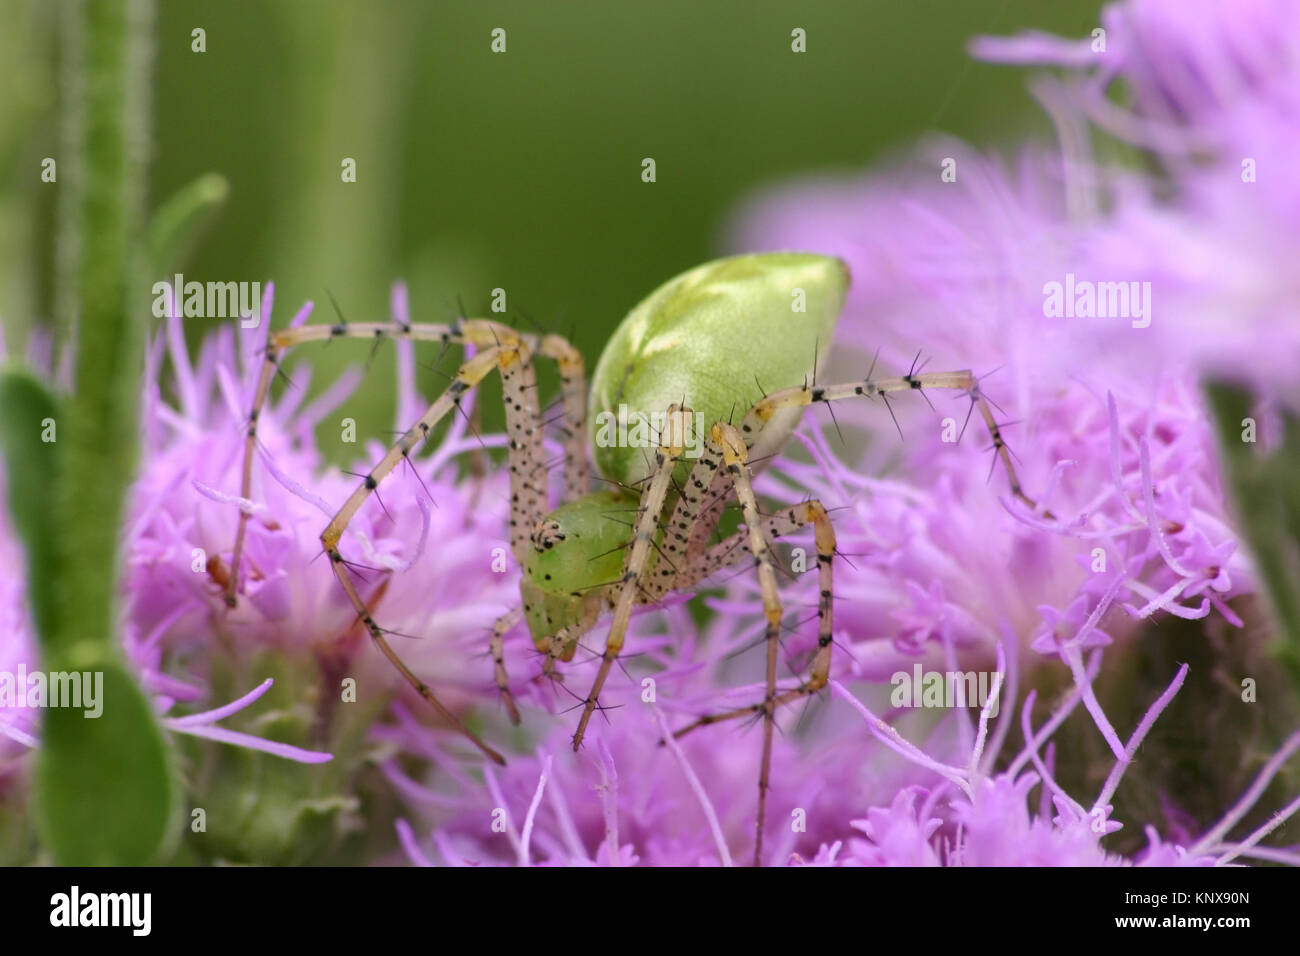 Closeup of an adult Green Lynx spider on purple paintbrush plants in Florida Stock Photo